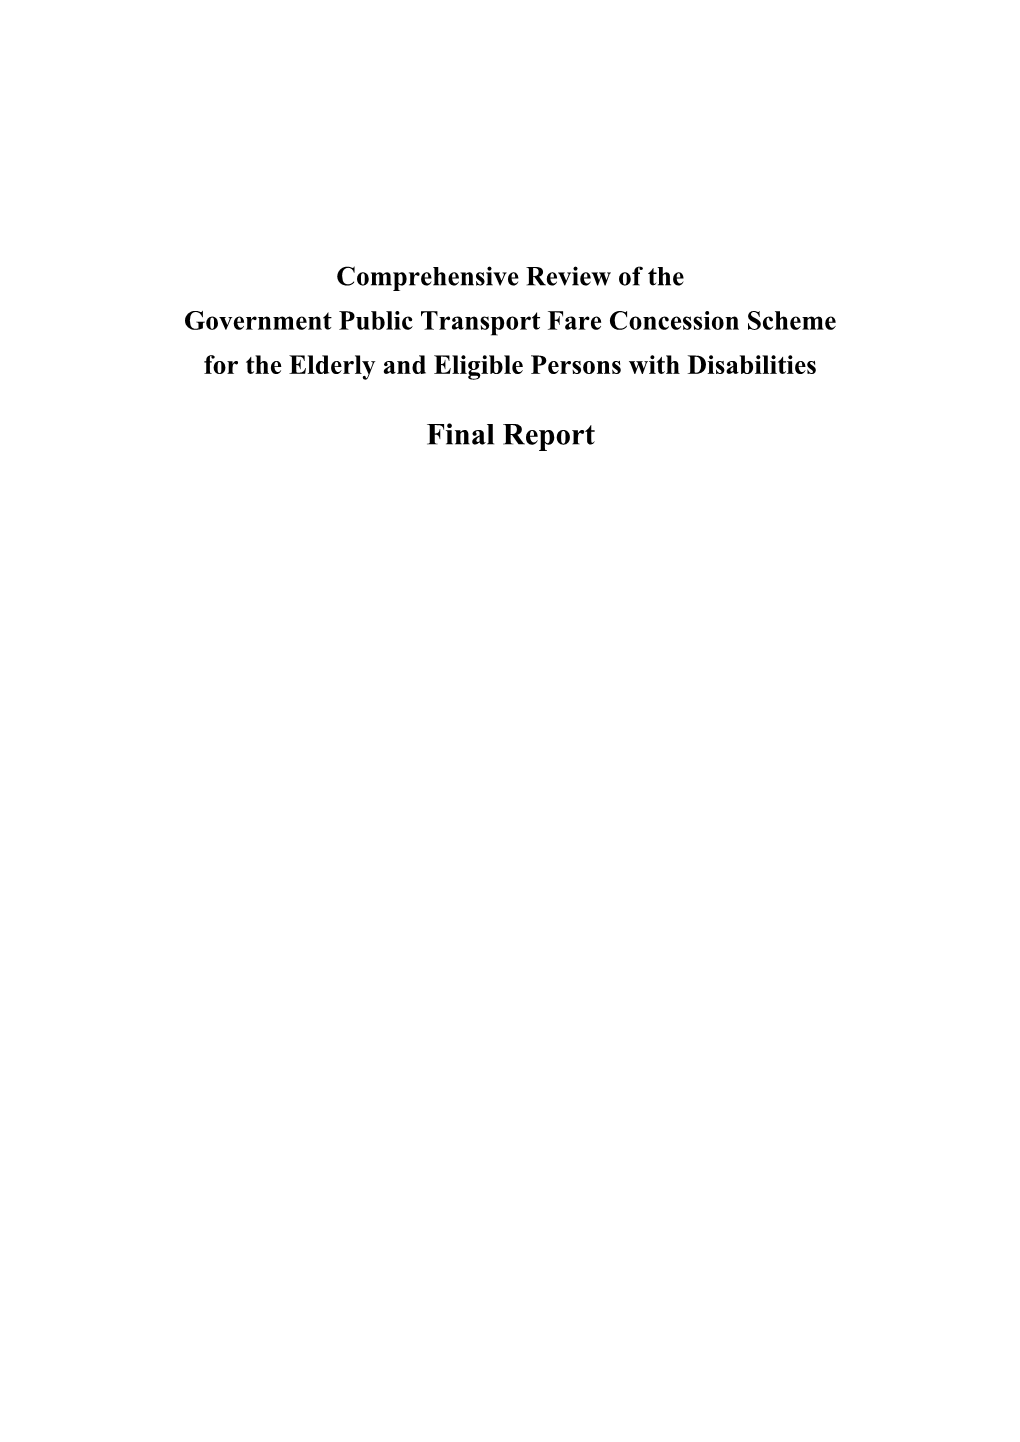 Comprehensive Review of the Government Public Transport Fare Concession Scheme for the Elderly and Eligible Persons with Disabilities